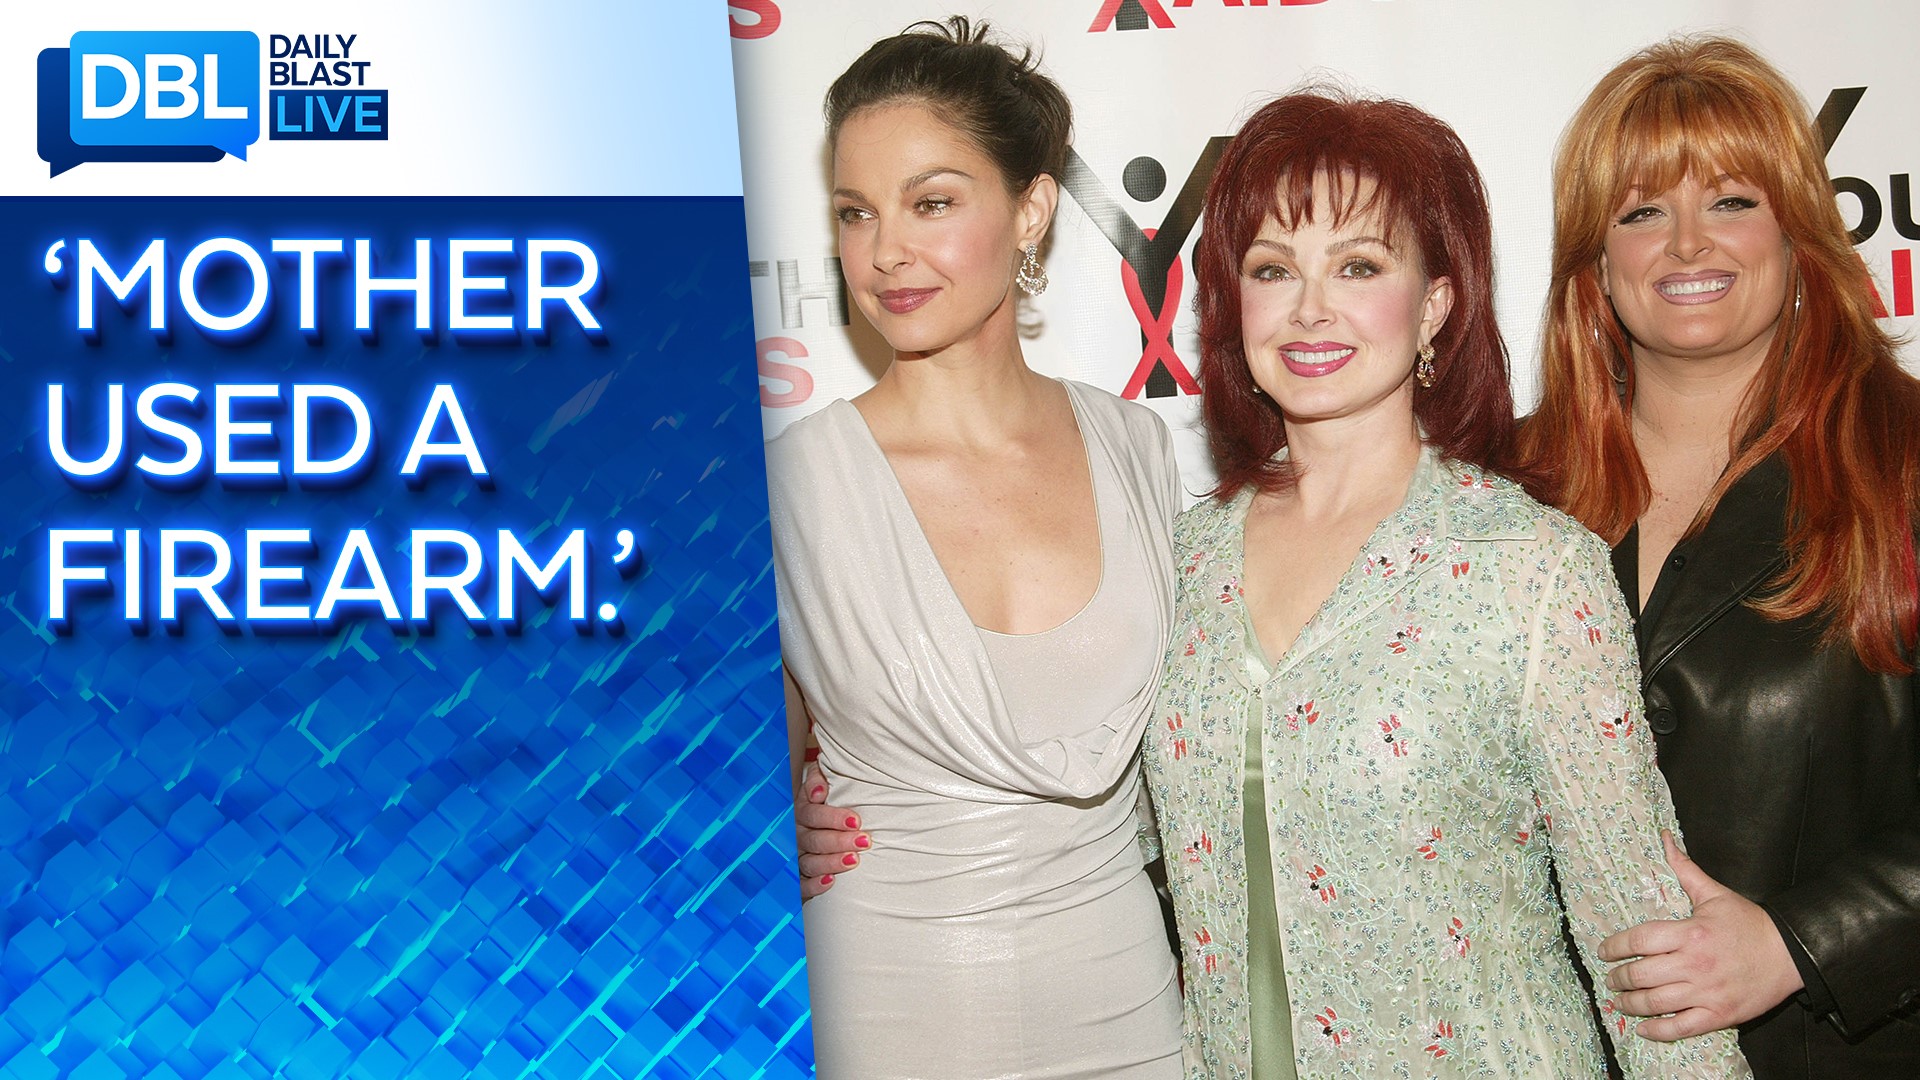 Not wanting to be part of the "gossip economy," actress Ashley Judd on Thursday morning shared more details about the disease that took her mom's life.